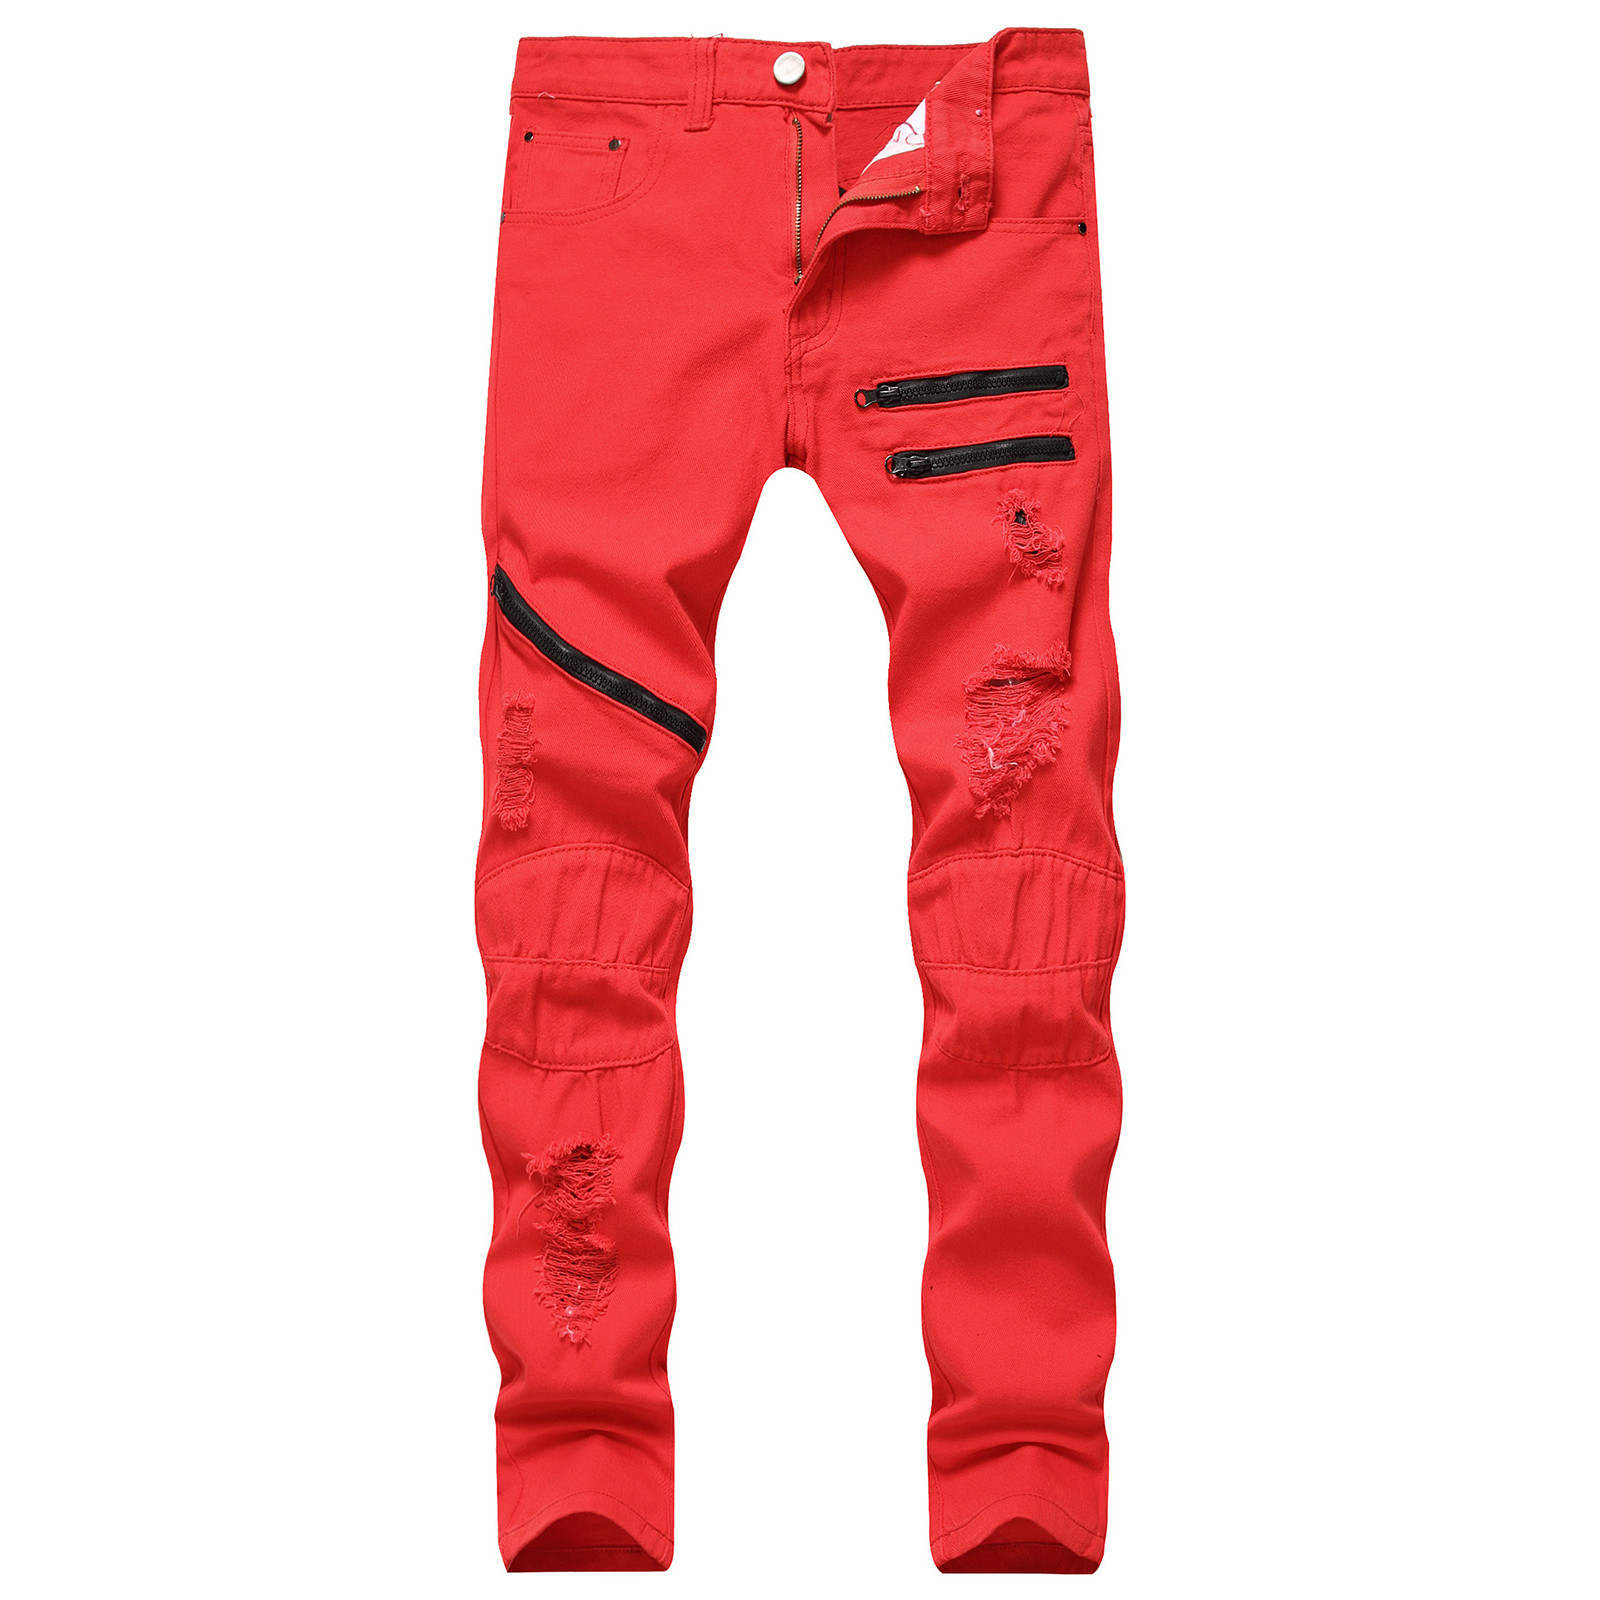 Pants for Men's Jeans Newly Slim Ripped Hip-hop Stretch Denim Cargo Pants Motorcycle Capri Trouse Pencil Pants - image 1 of 4